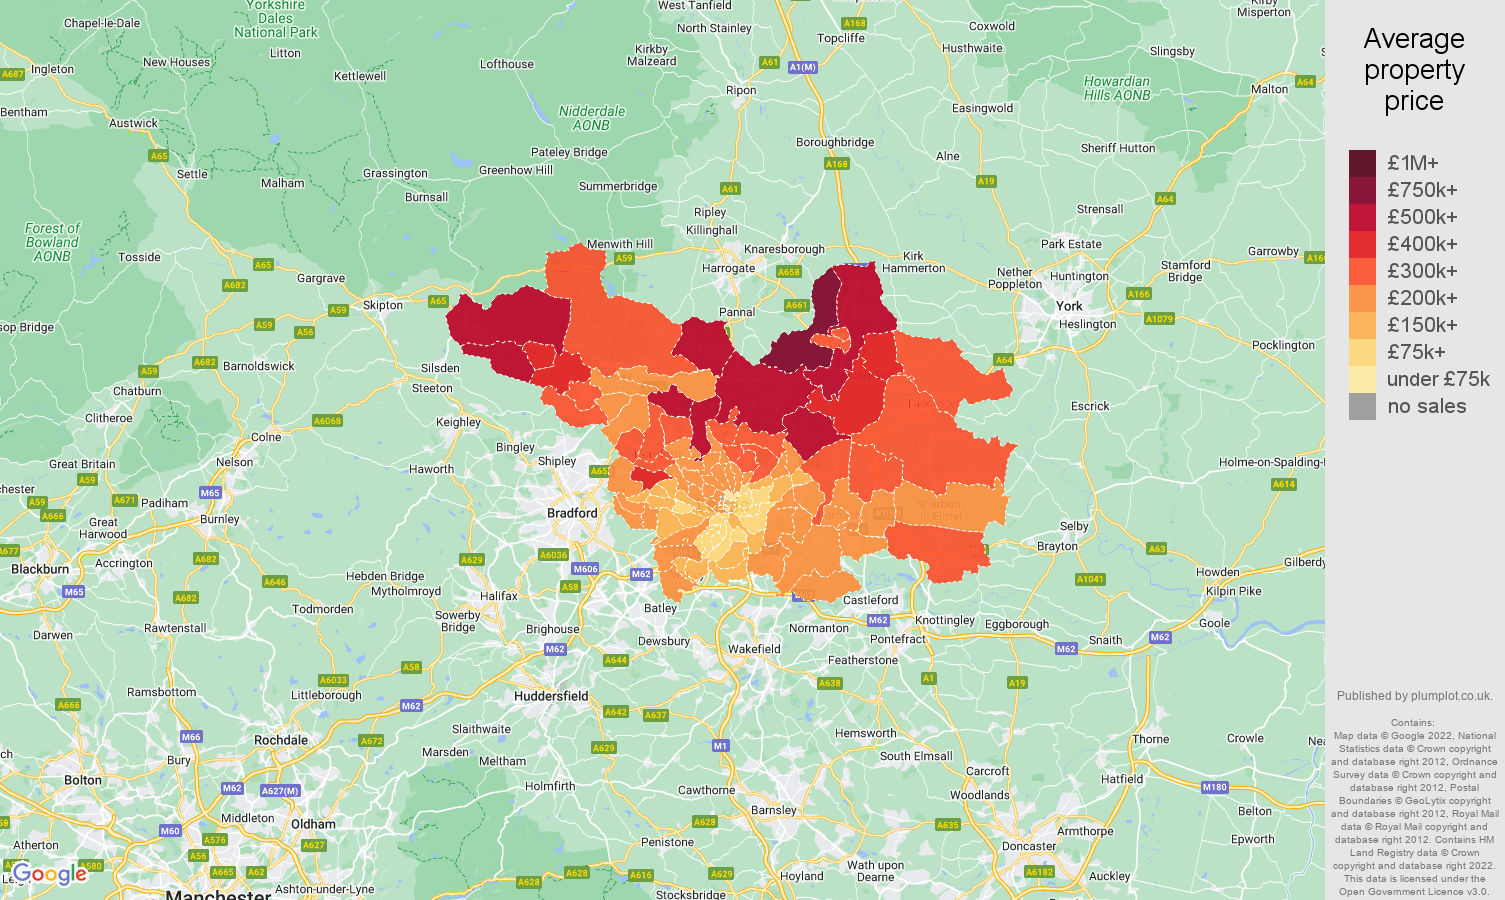 Leeds property prices by postcode sector